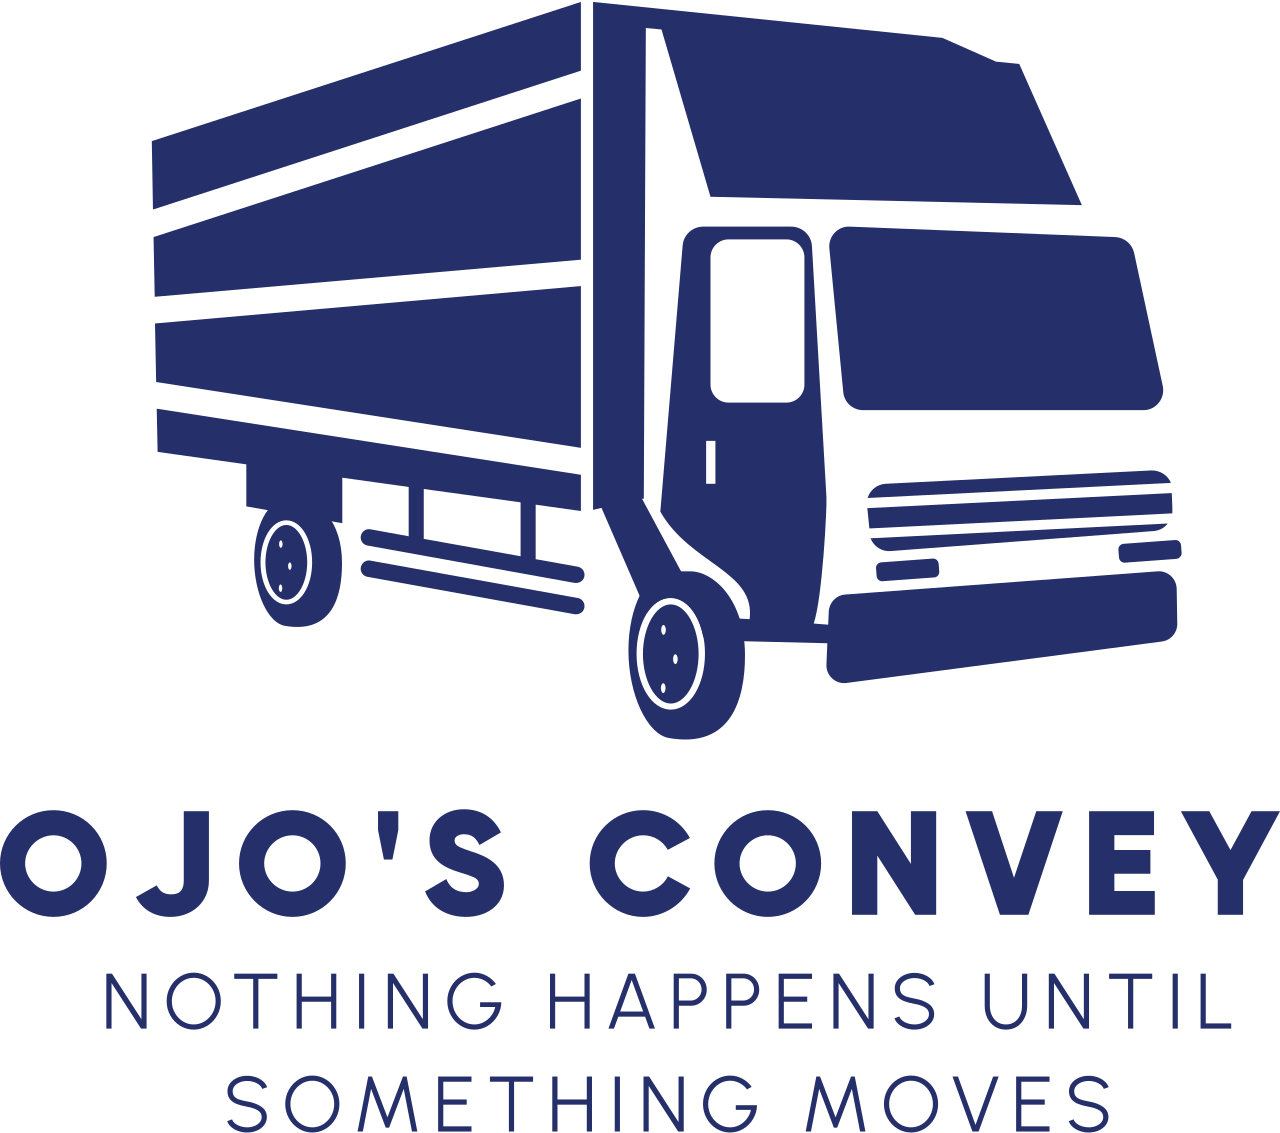 Ojo's Convey 's web page